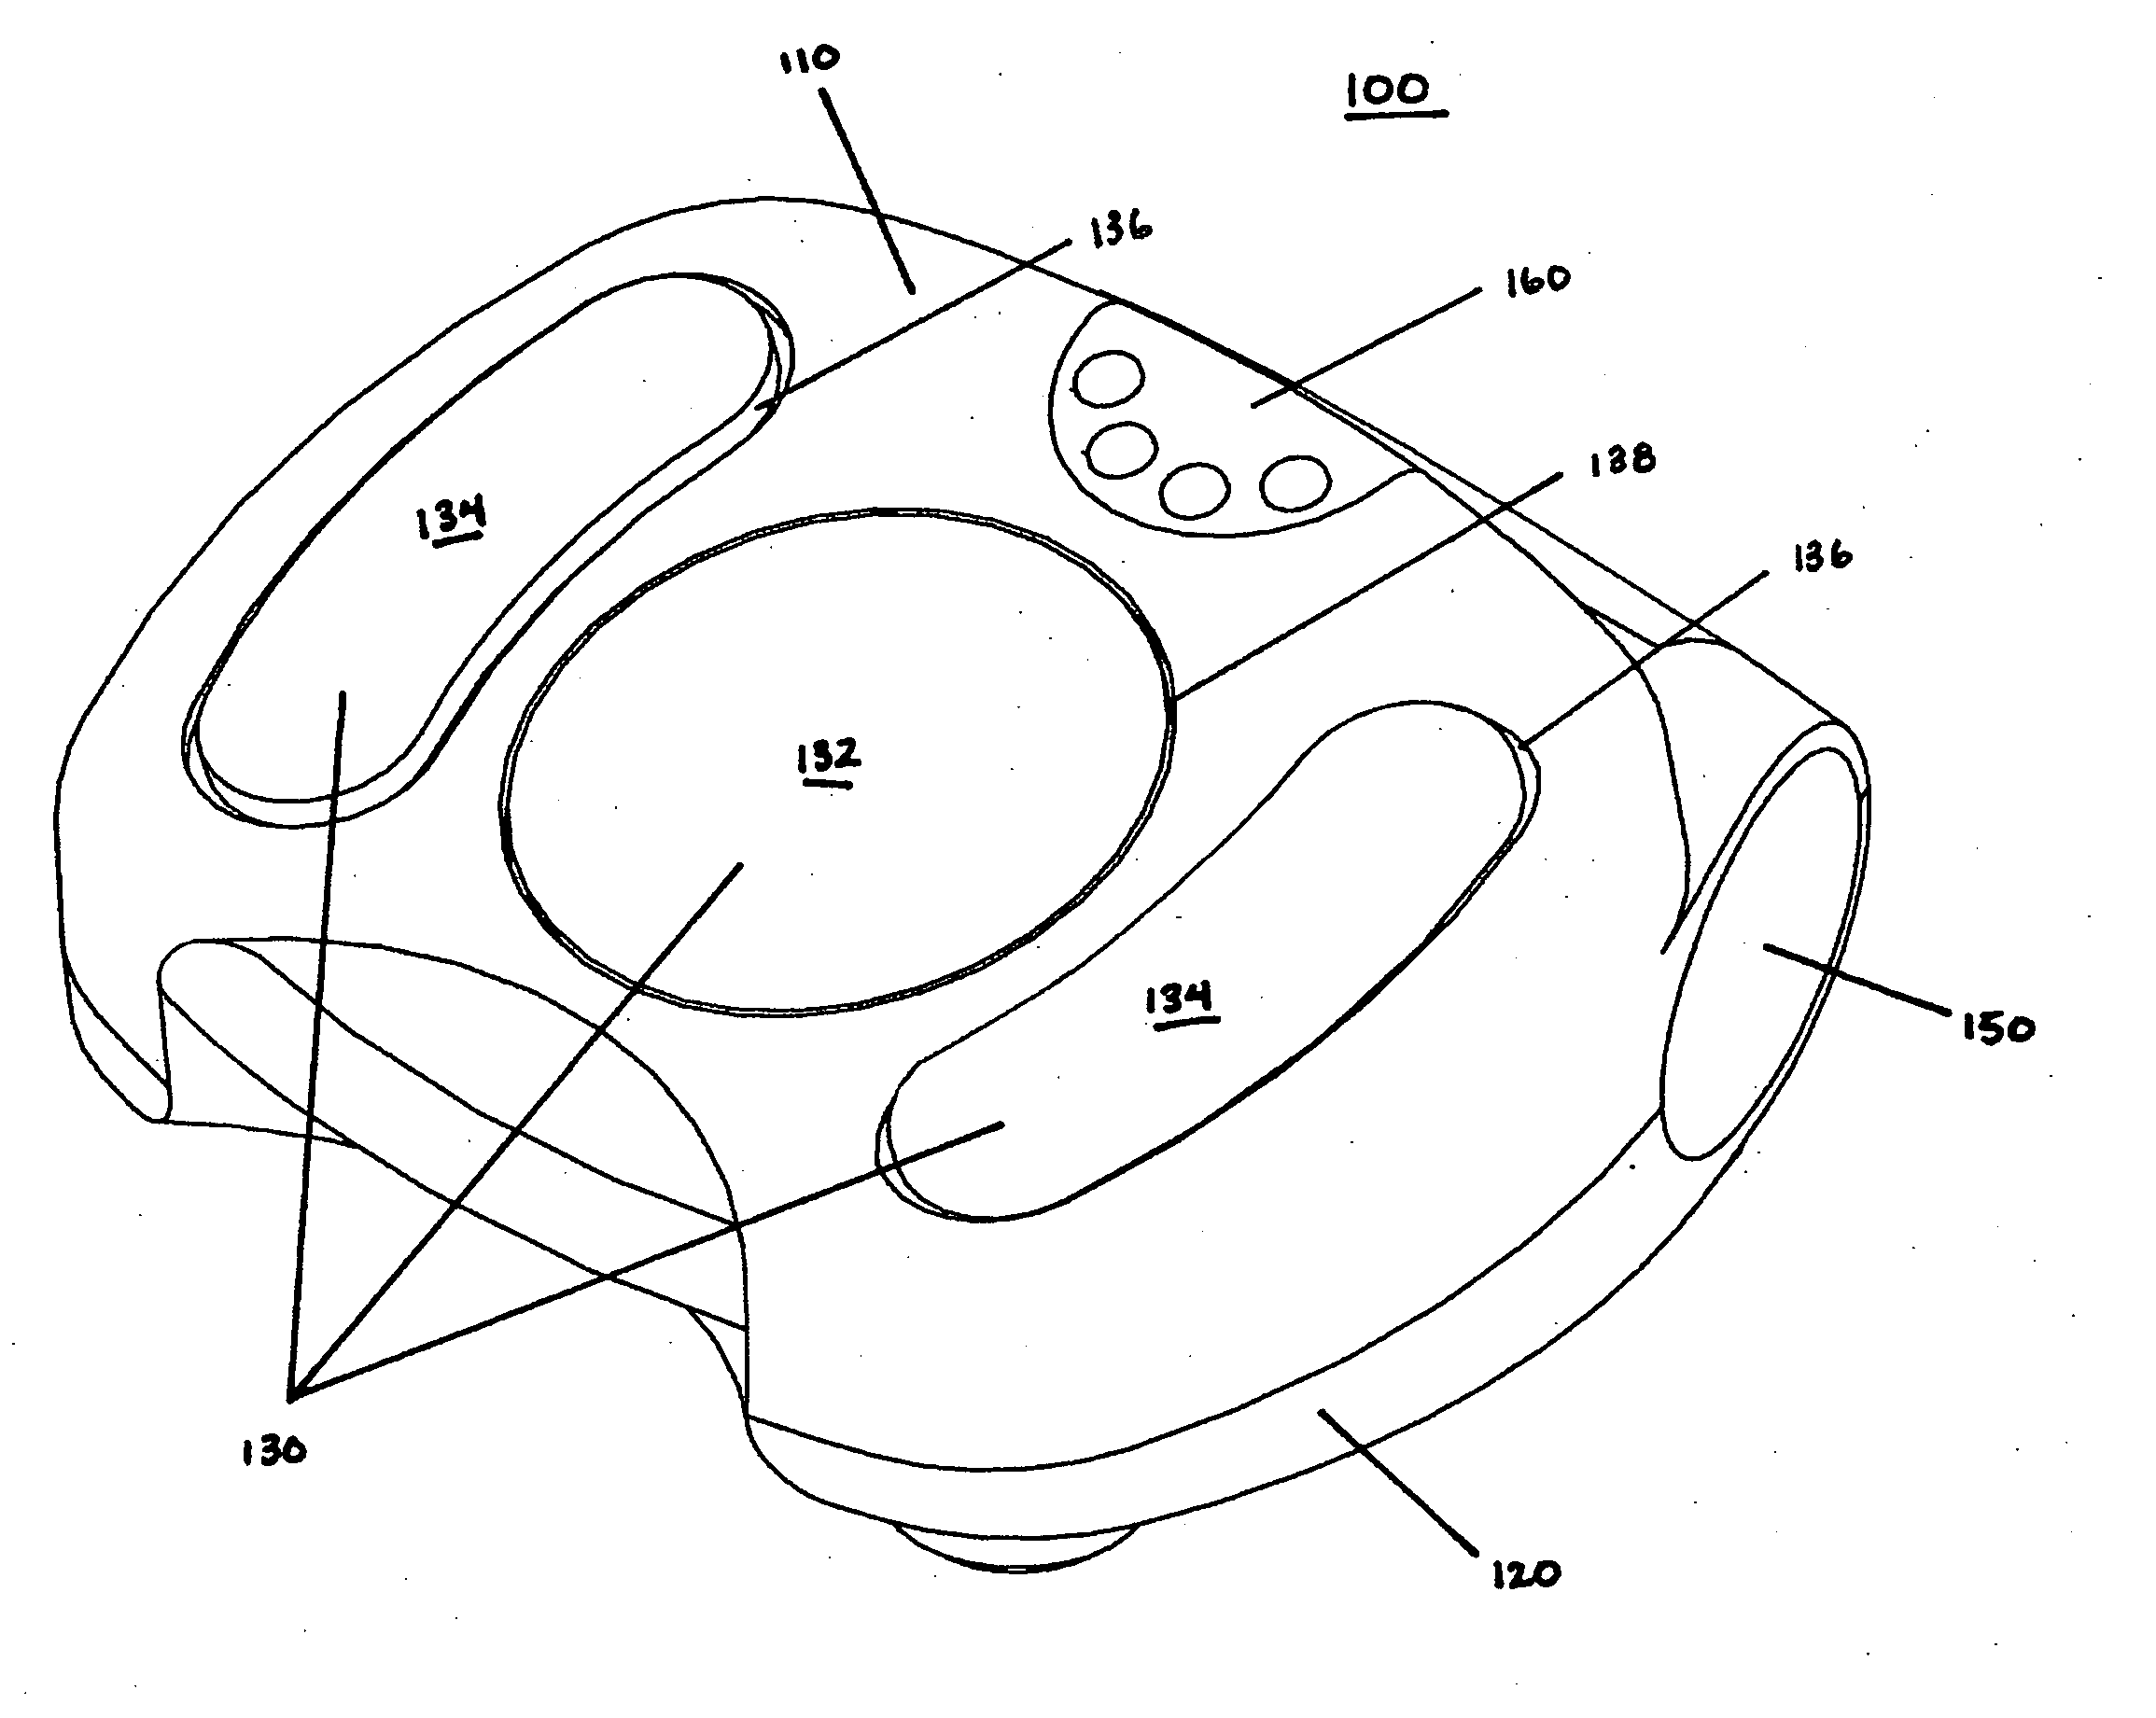 Body part treatment device with air diverter